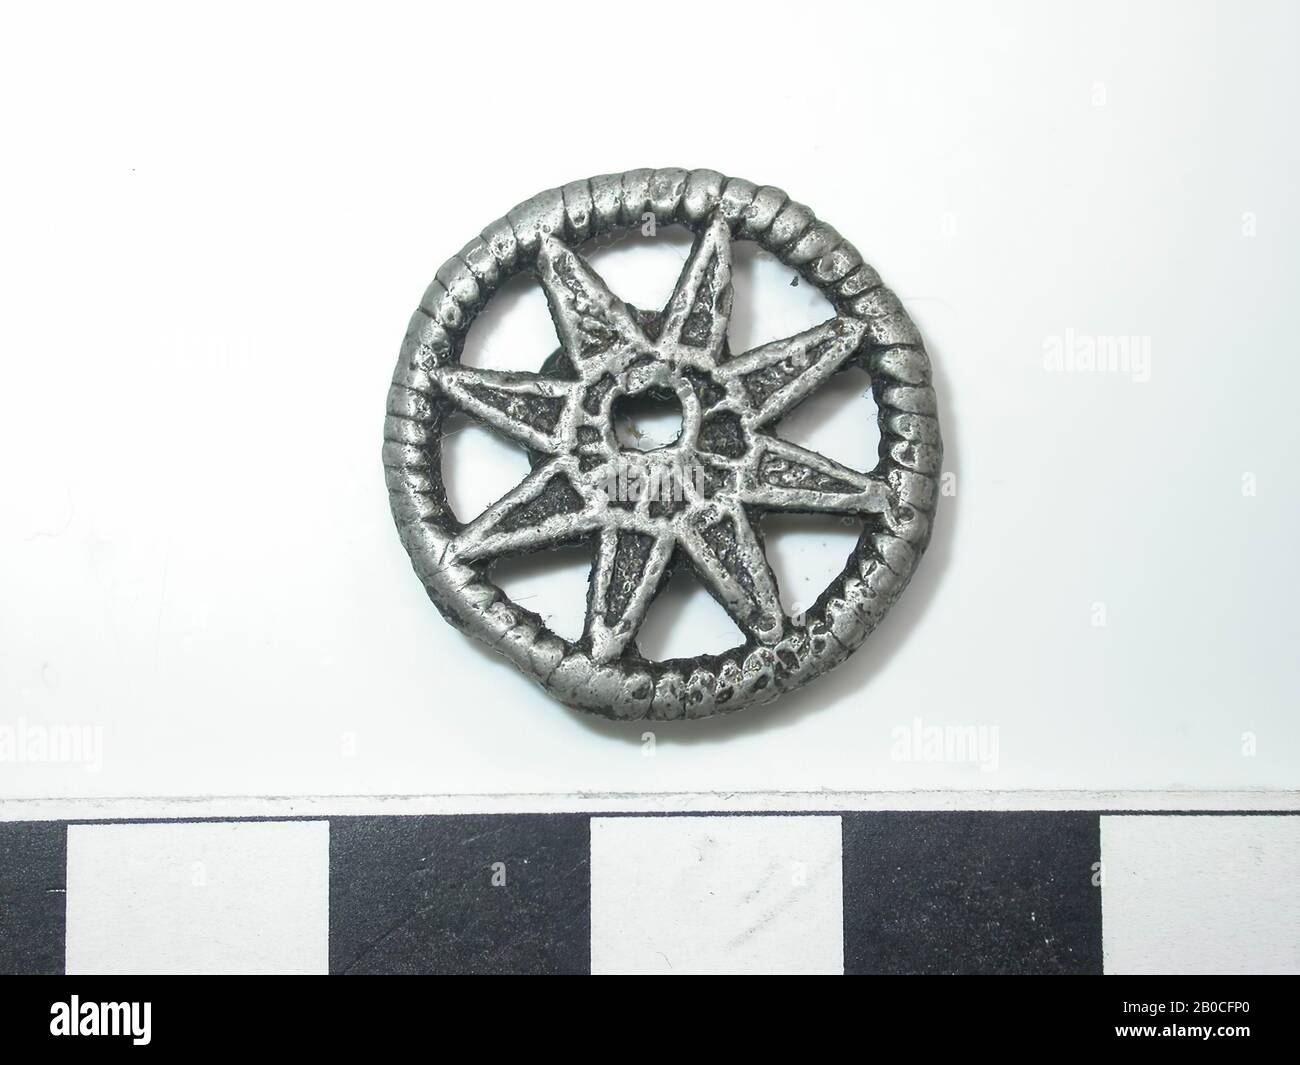 The Netherlands Middle Ages, belt fittings, metal, bronze, Dm, 2.25 cm, D, 0.2 cm, late 14th century 1350-1400, the Netherlands, Zeeland, Hulst, Drowned Land Stock Photo